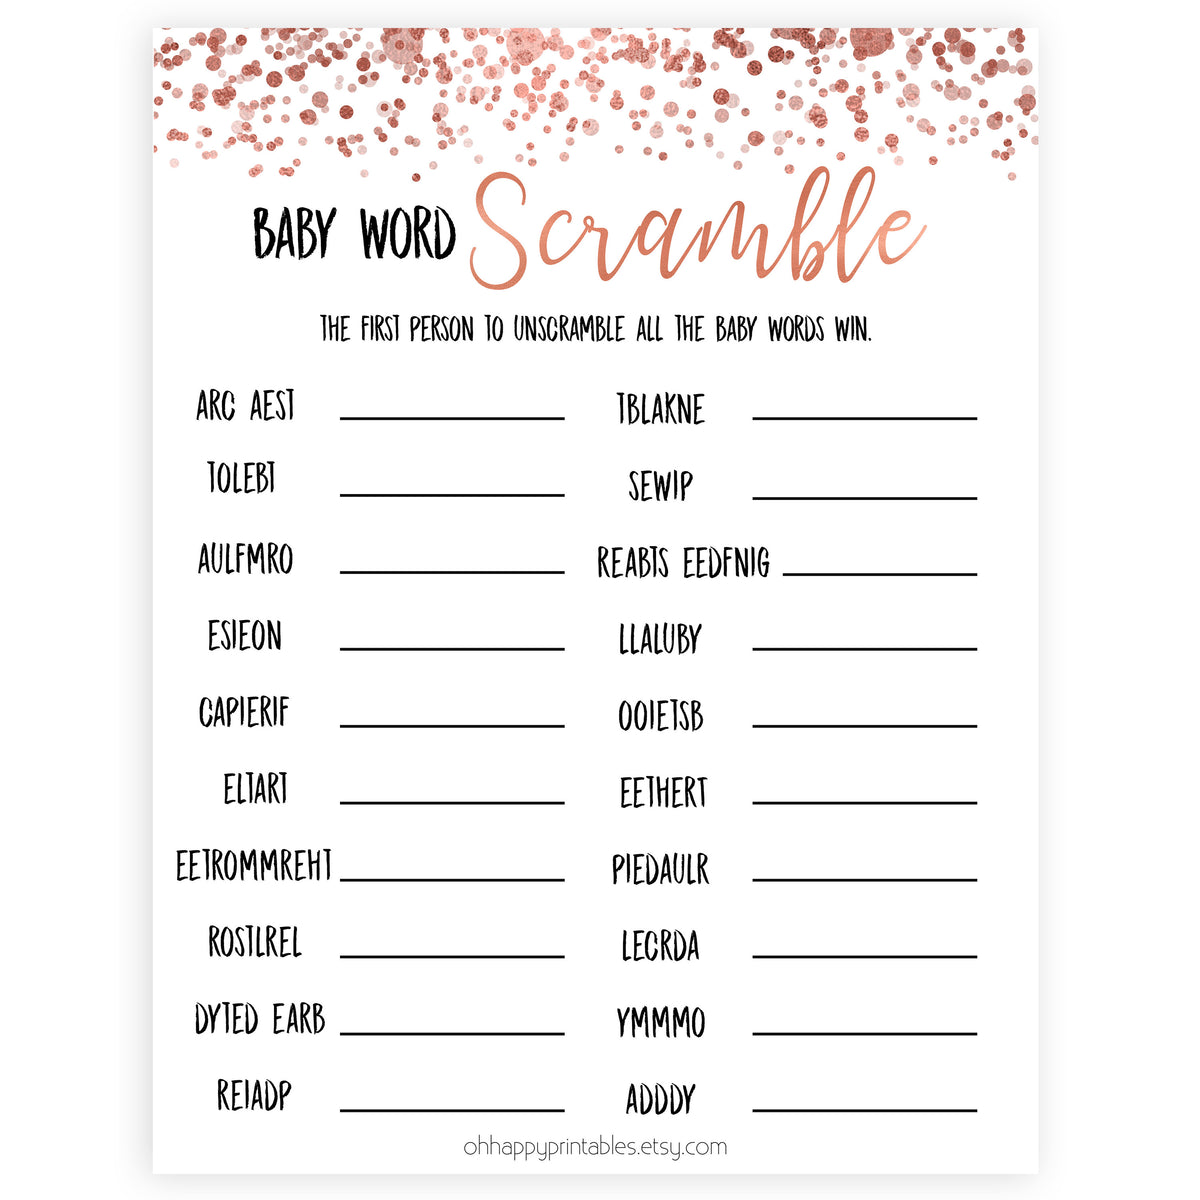 Rose Gold Baby Word Scramble Game, Baby Word Scramble, Baby Scattagories, Funny Baby Shower Games, Word Scramble, Baby Shower Printable baby shower games, fun baby shower games, popular baby shower game